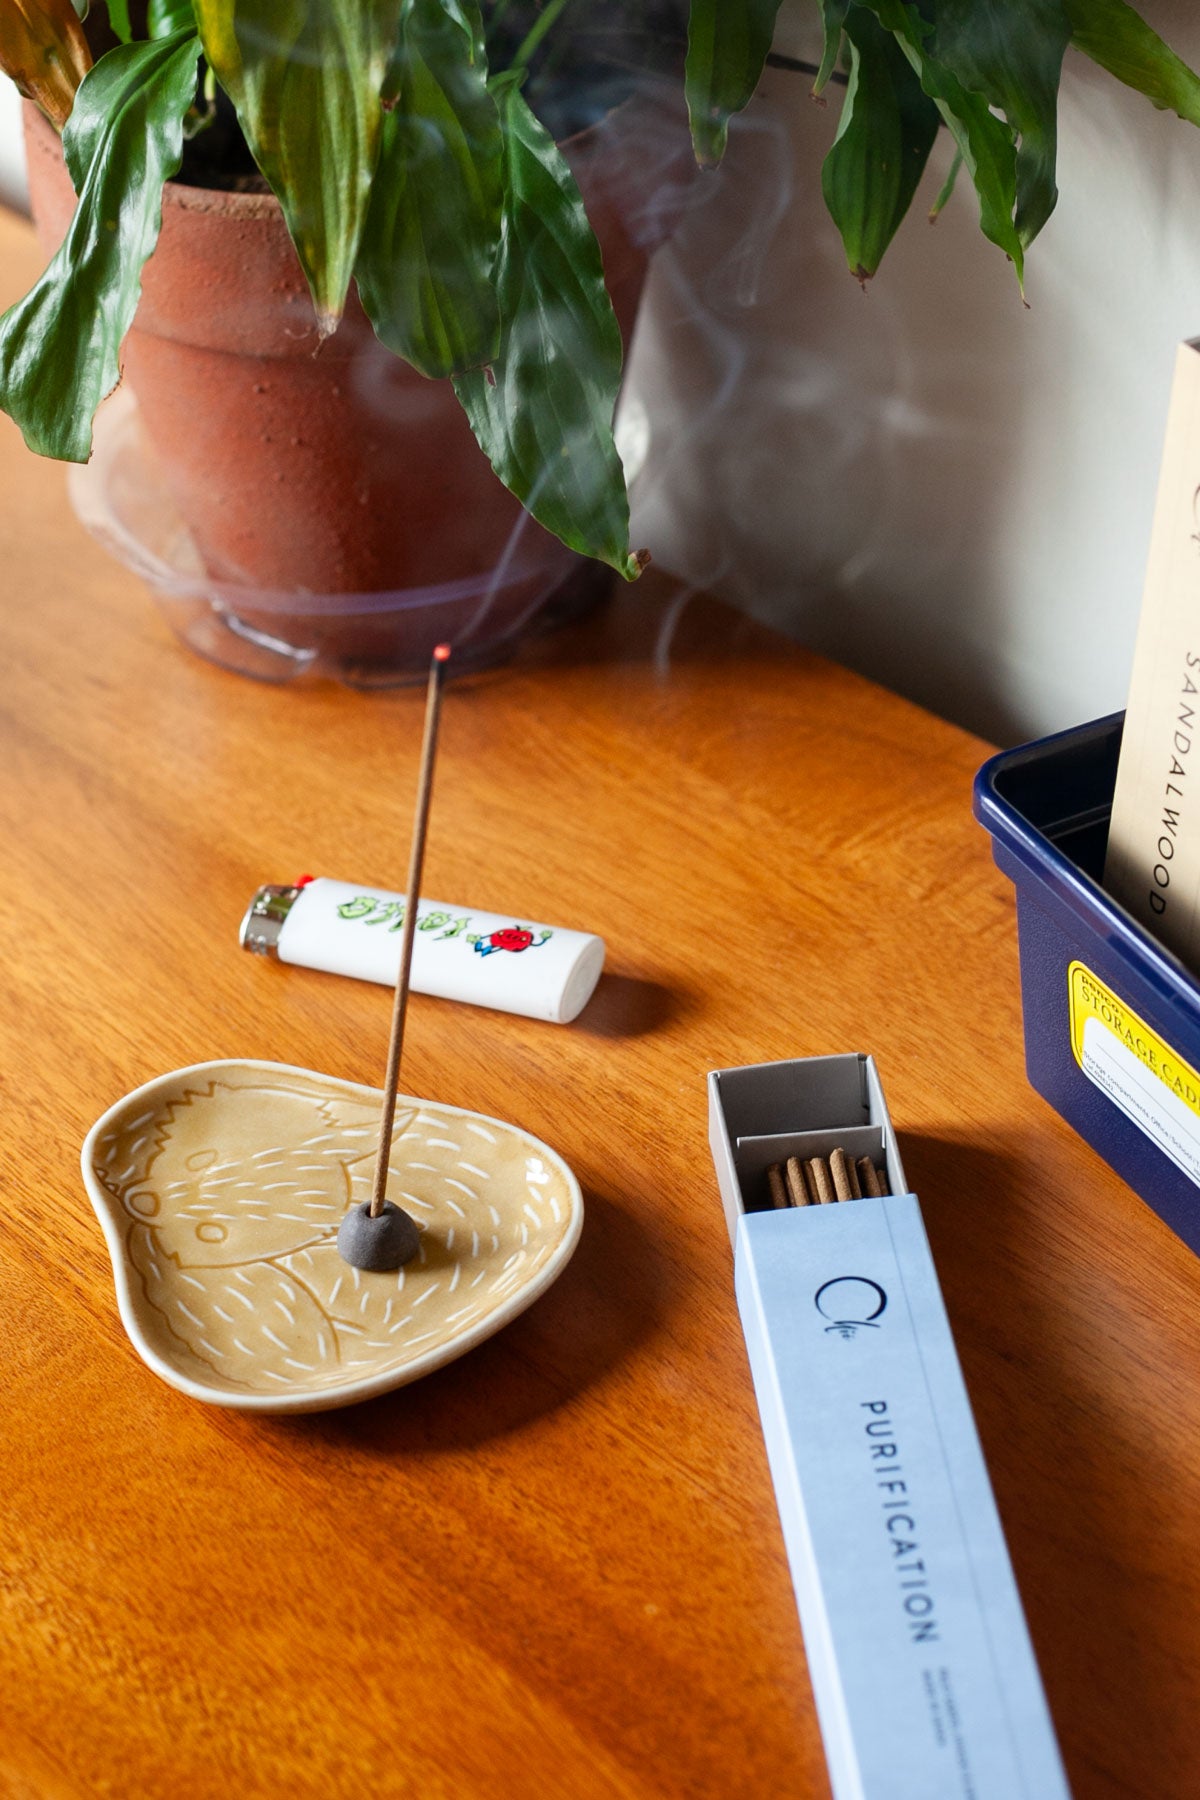 Incense burning on a tabletop